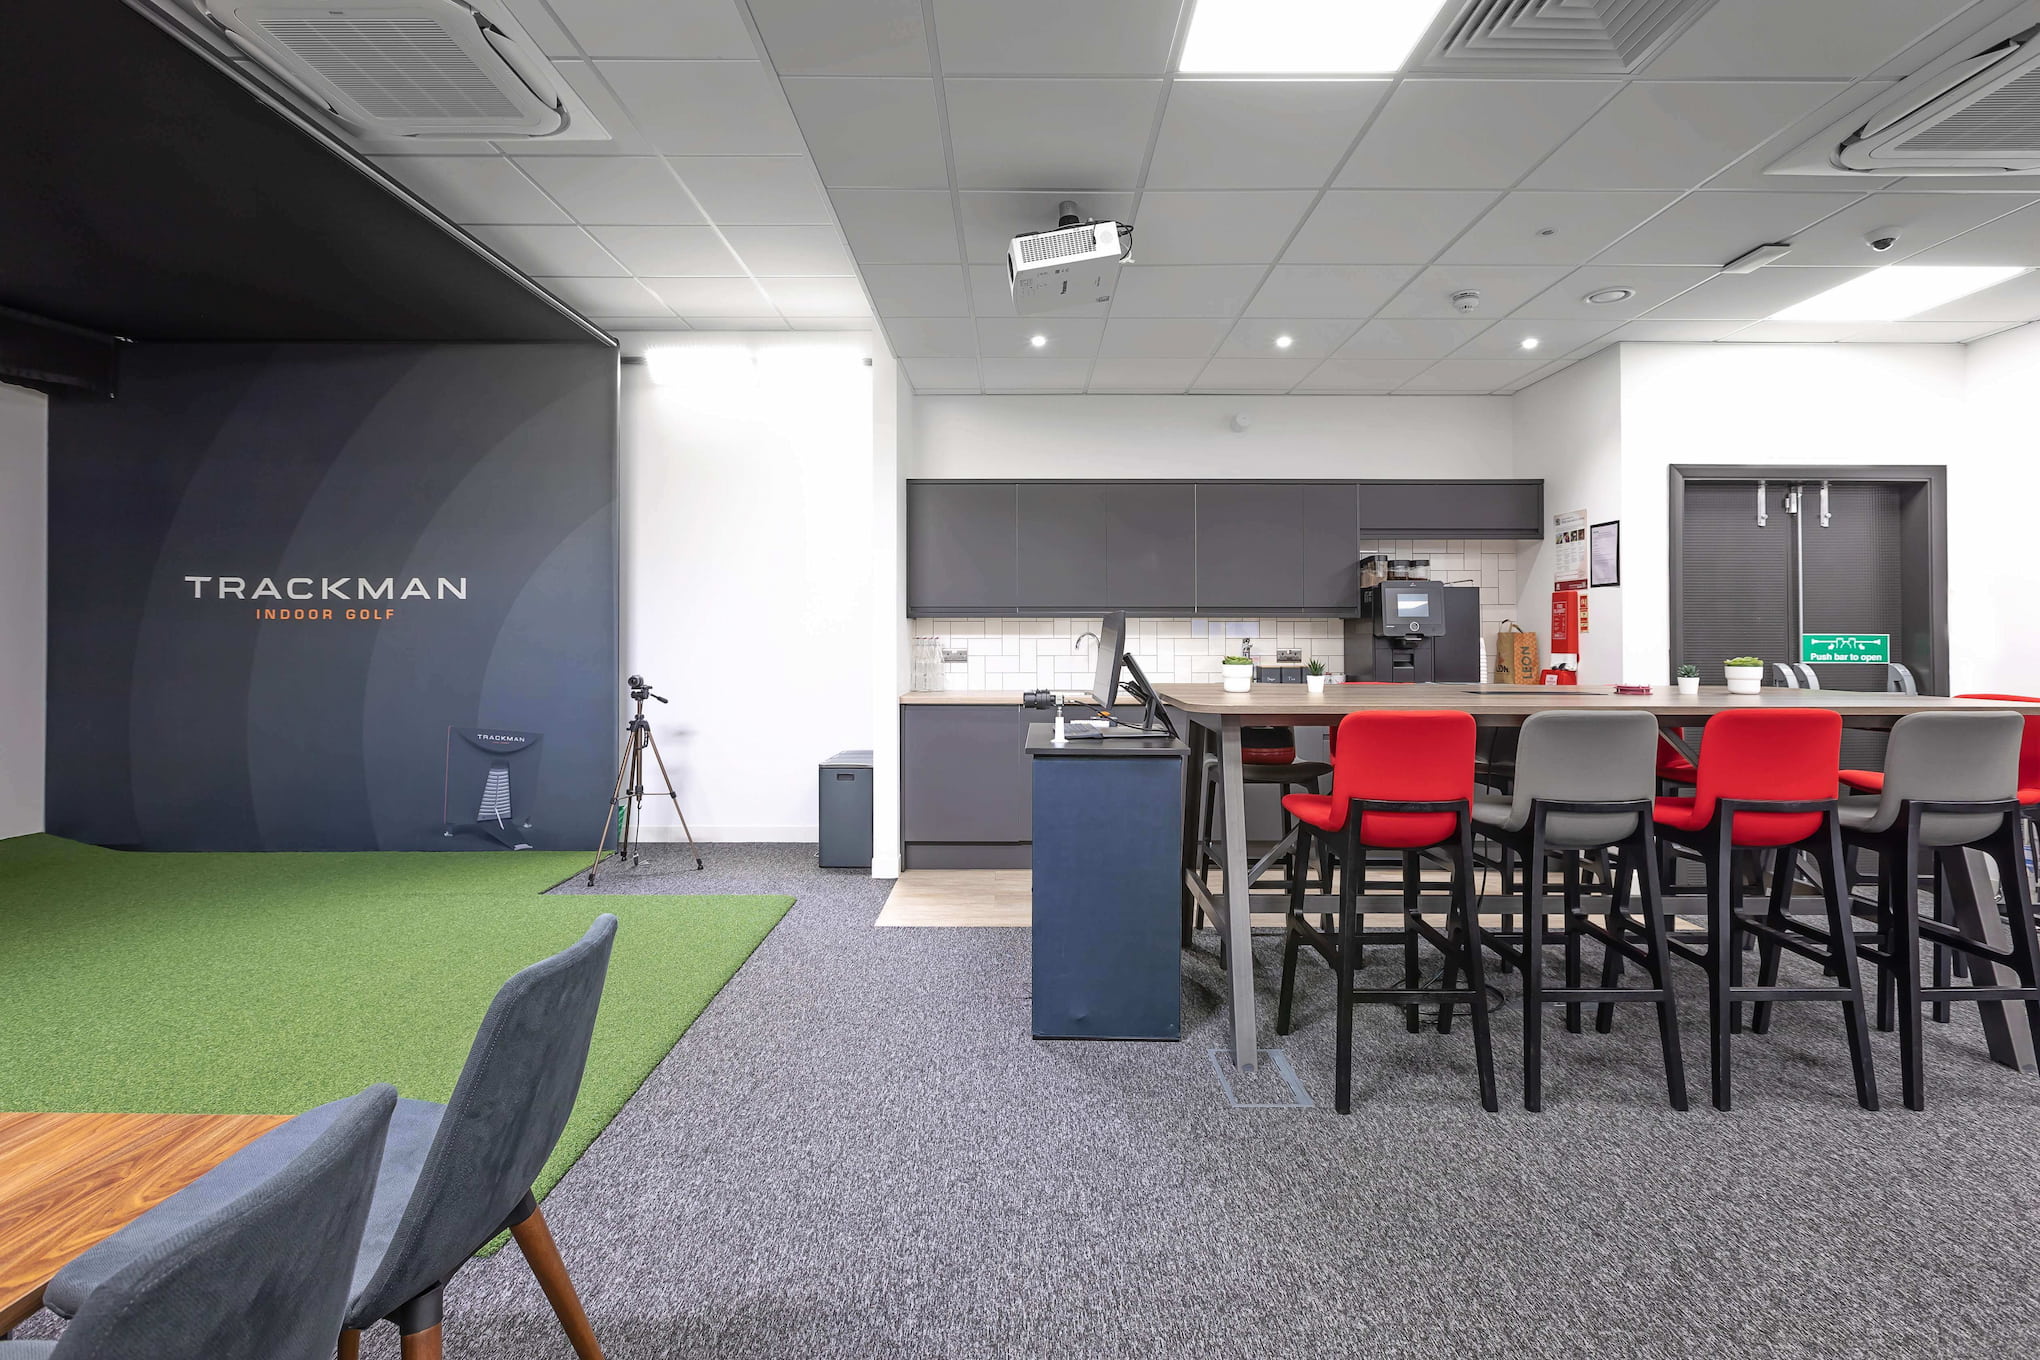 An office space with a kitchenette on the right and a golf simulator on the left.